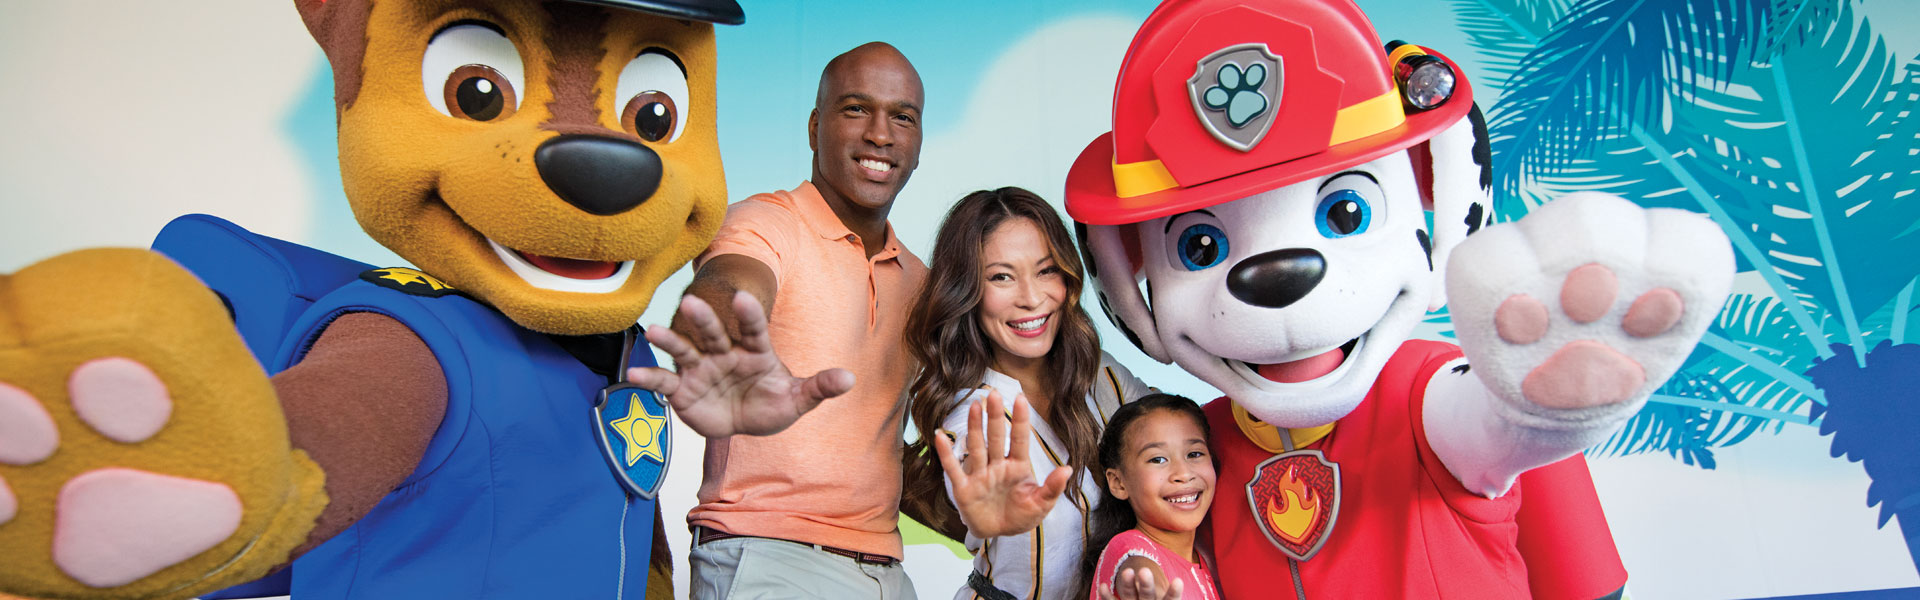 Paw Patrol Live  Meet Marshall, Chase & all PAW Patrol Crew with  Experiences by Nick